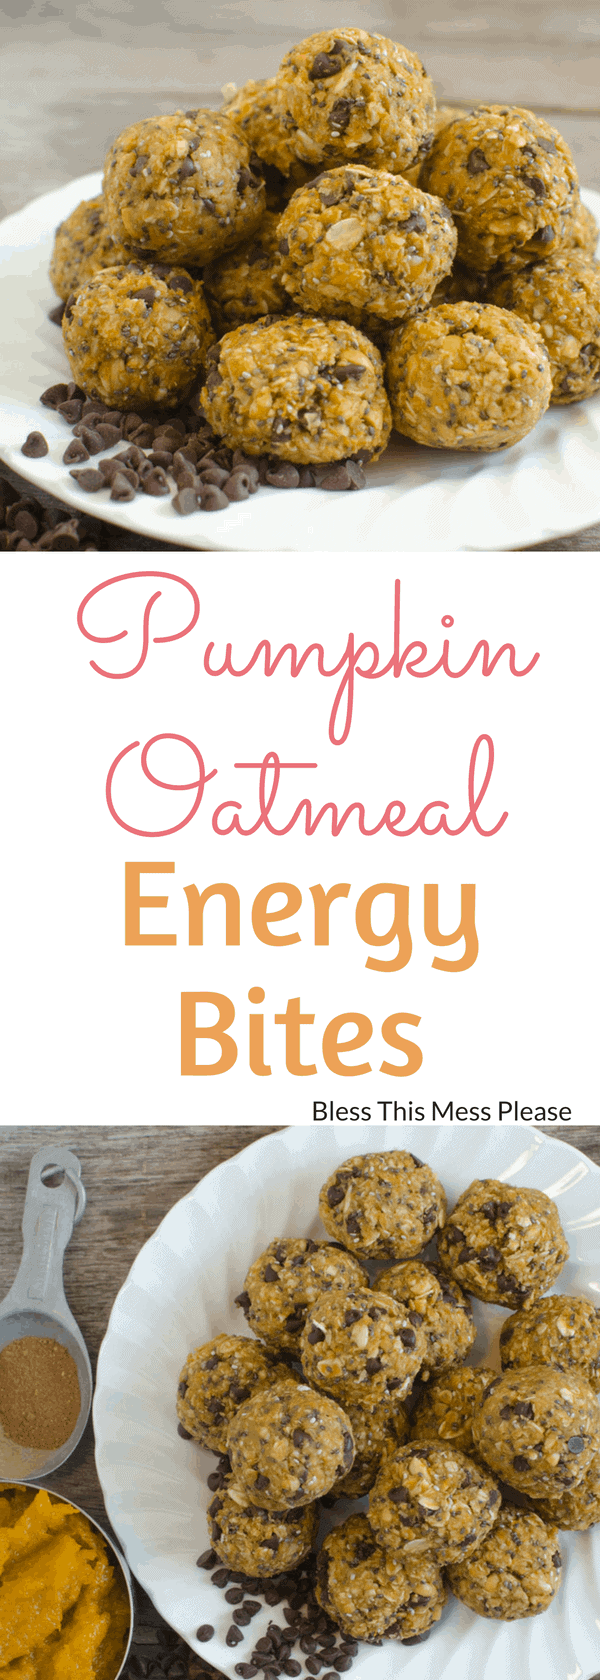 Healthy No Bake Pumpkin Oatmeal Energy Bites are going to be your go-to healthy snack all fall long.